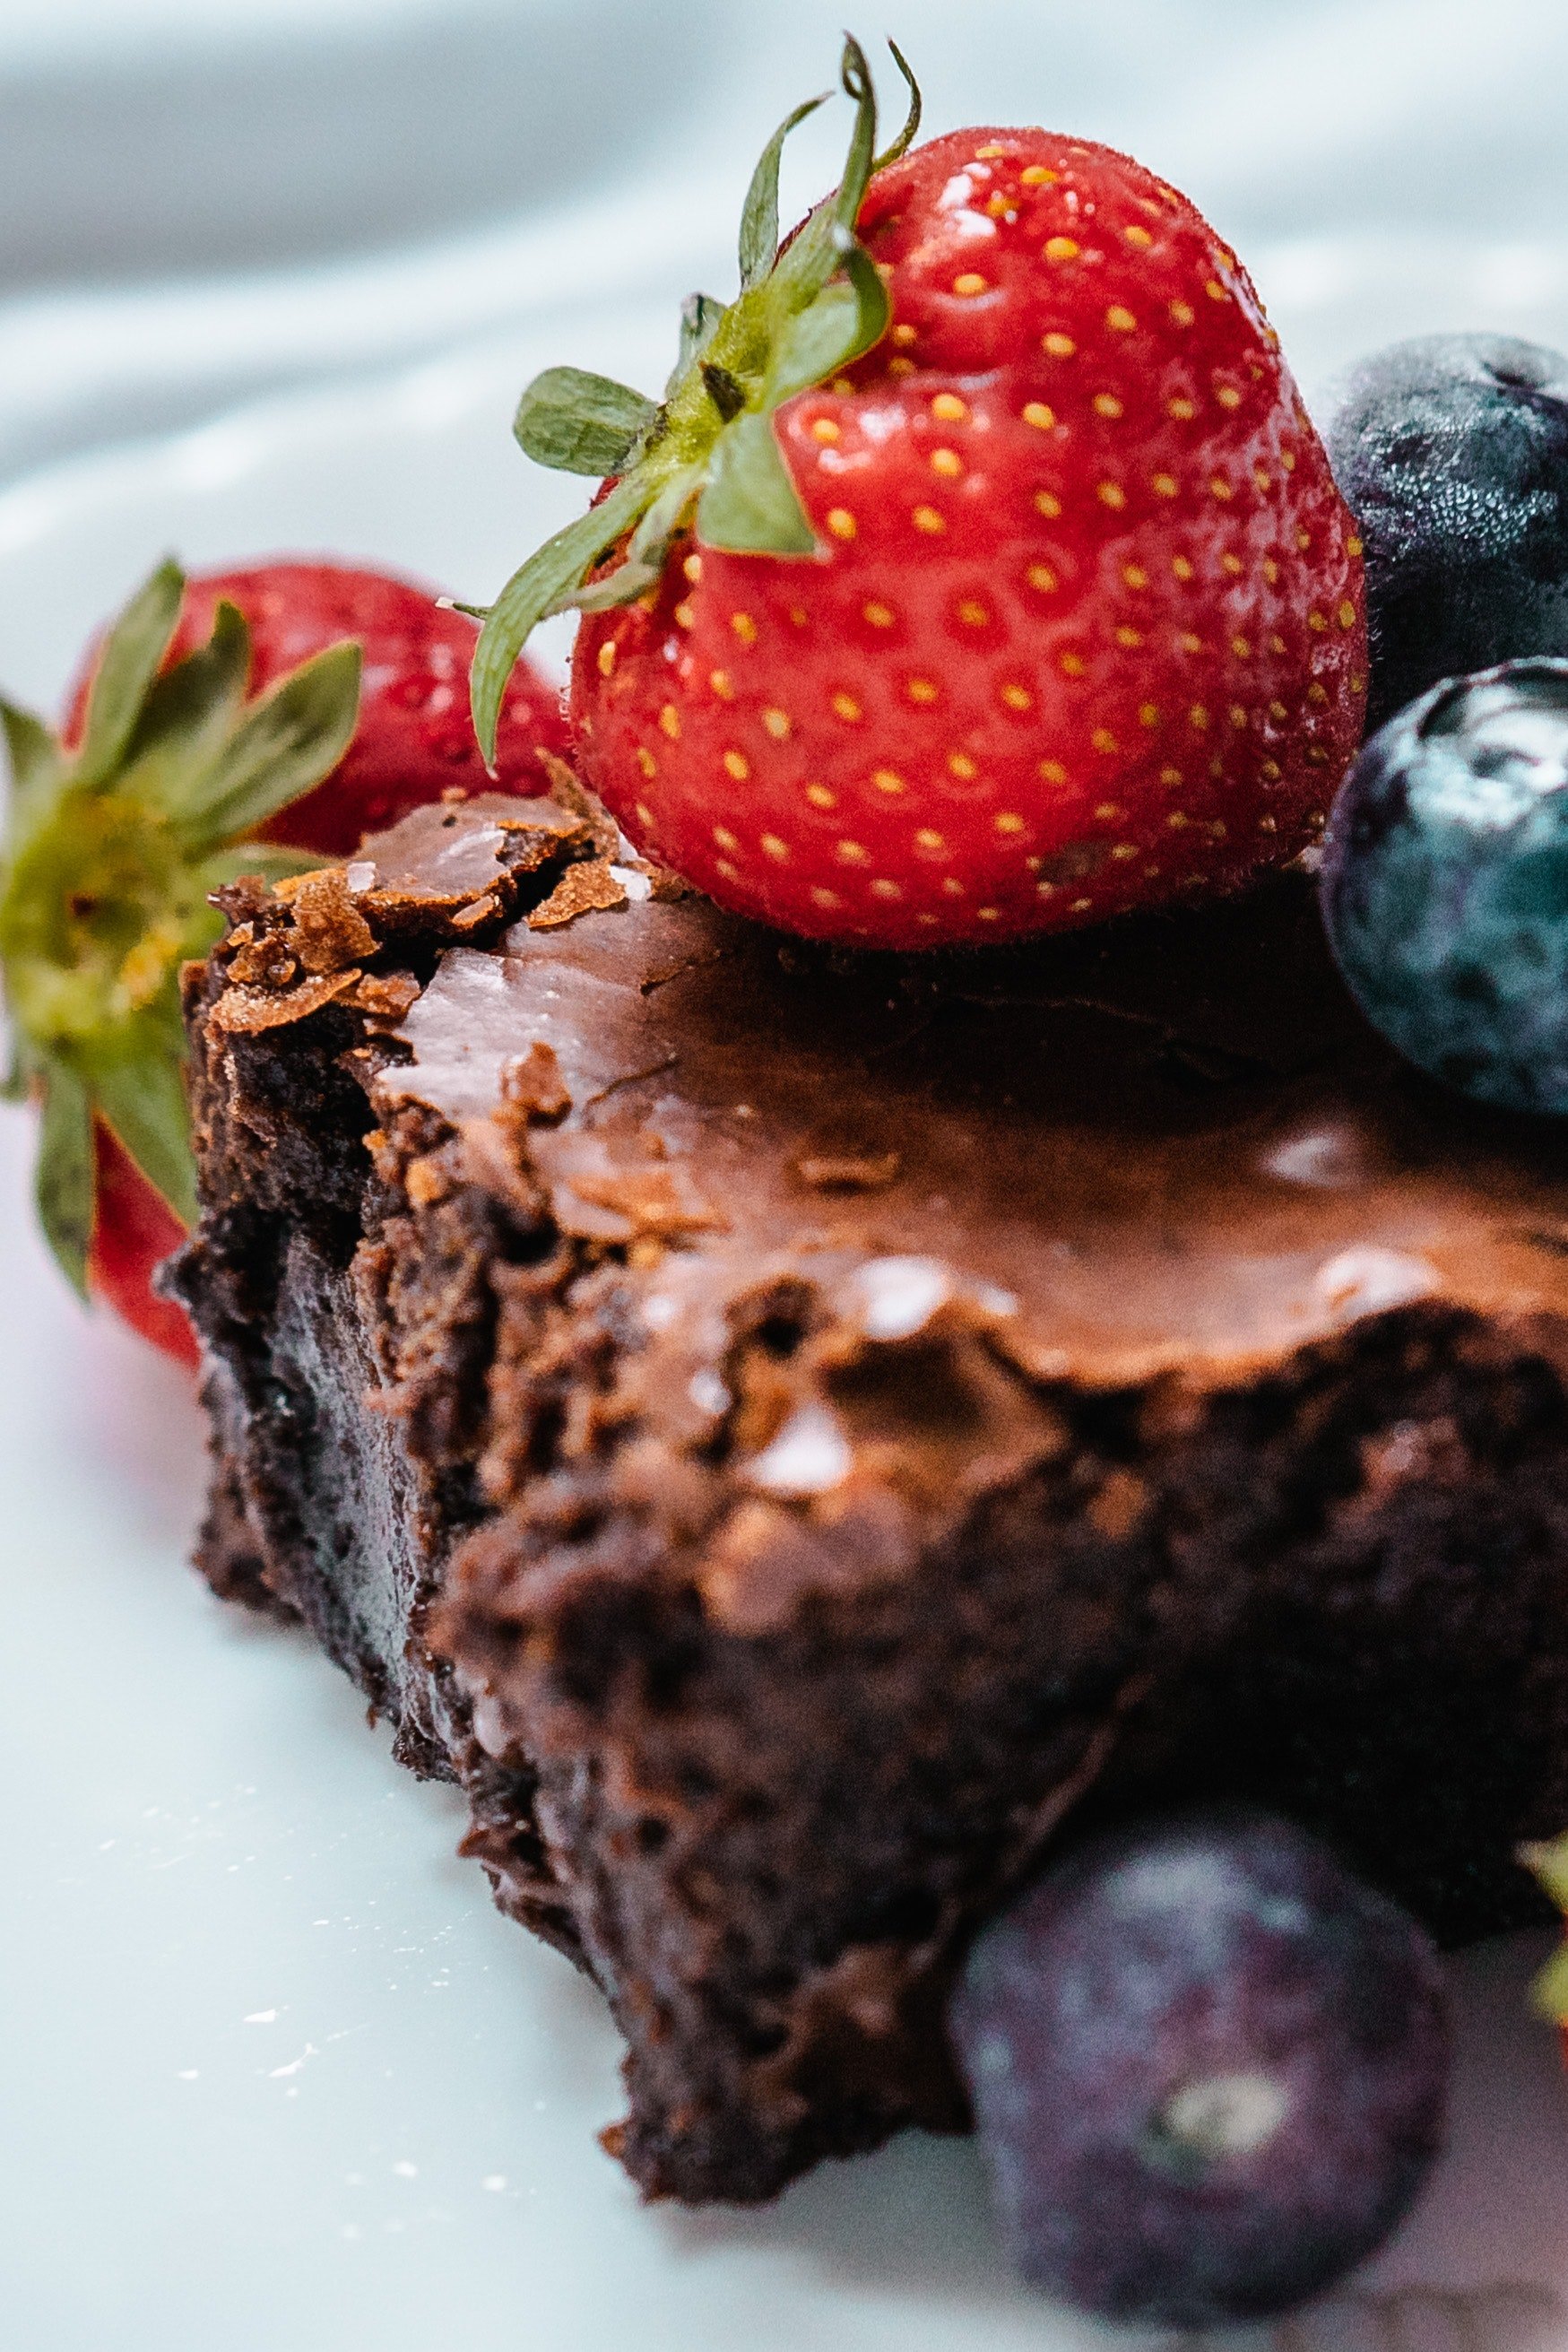 Jenny became famous for her chocolate pies. | Source: Pexels